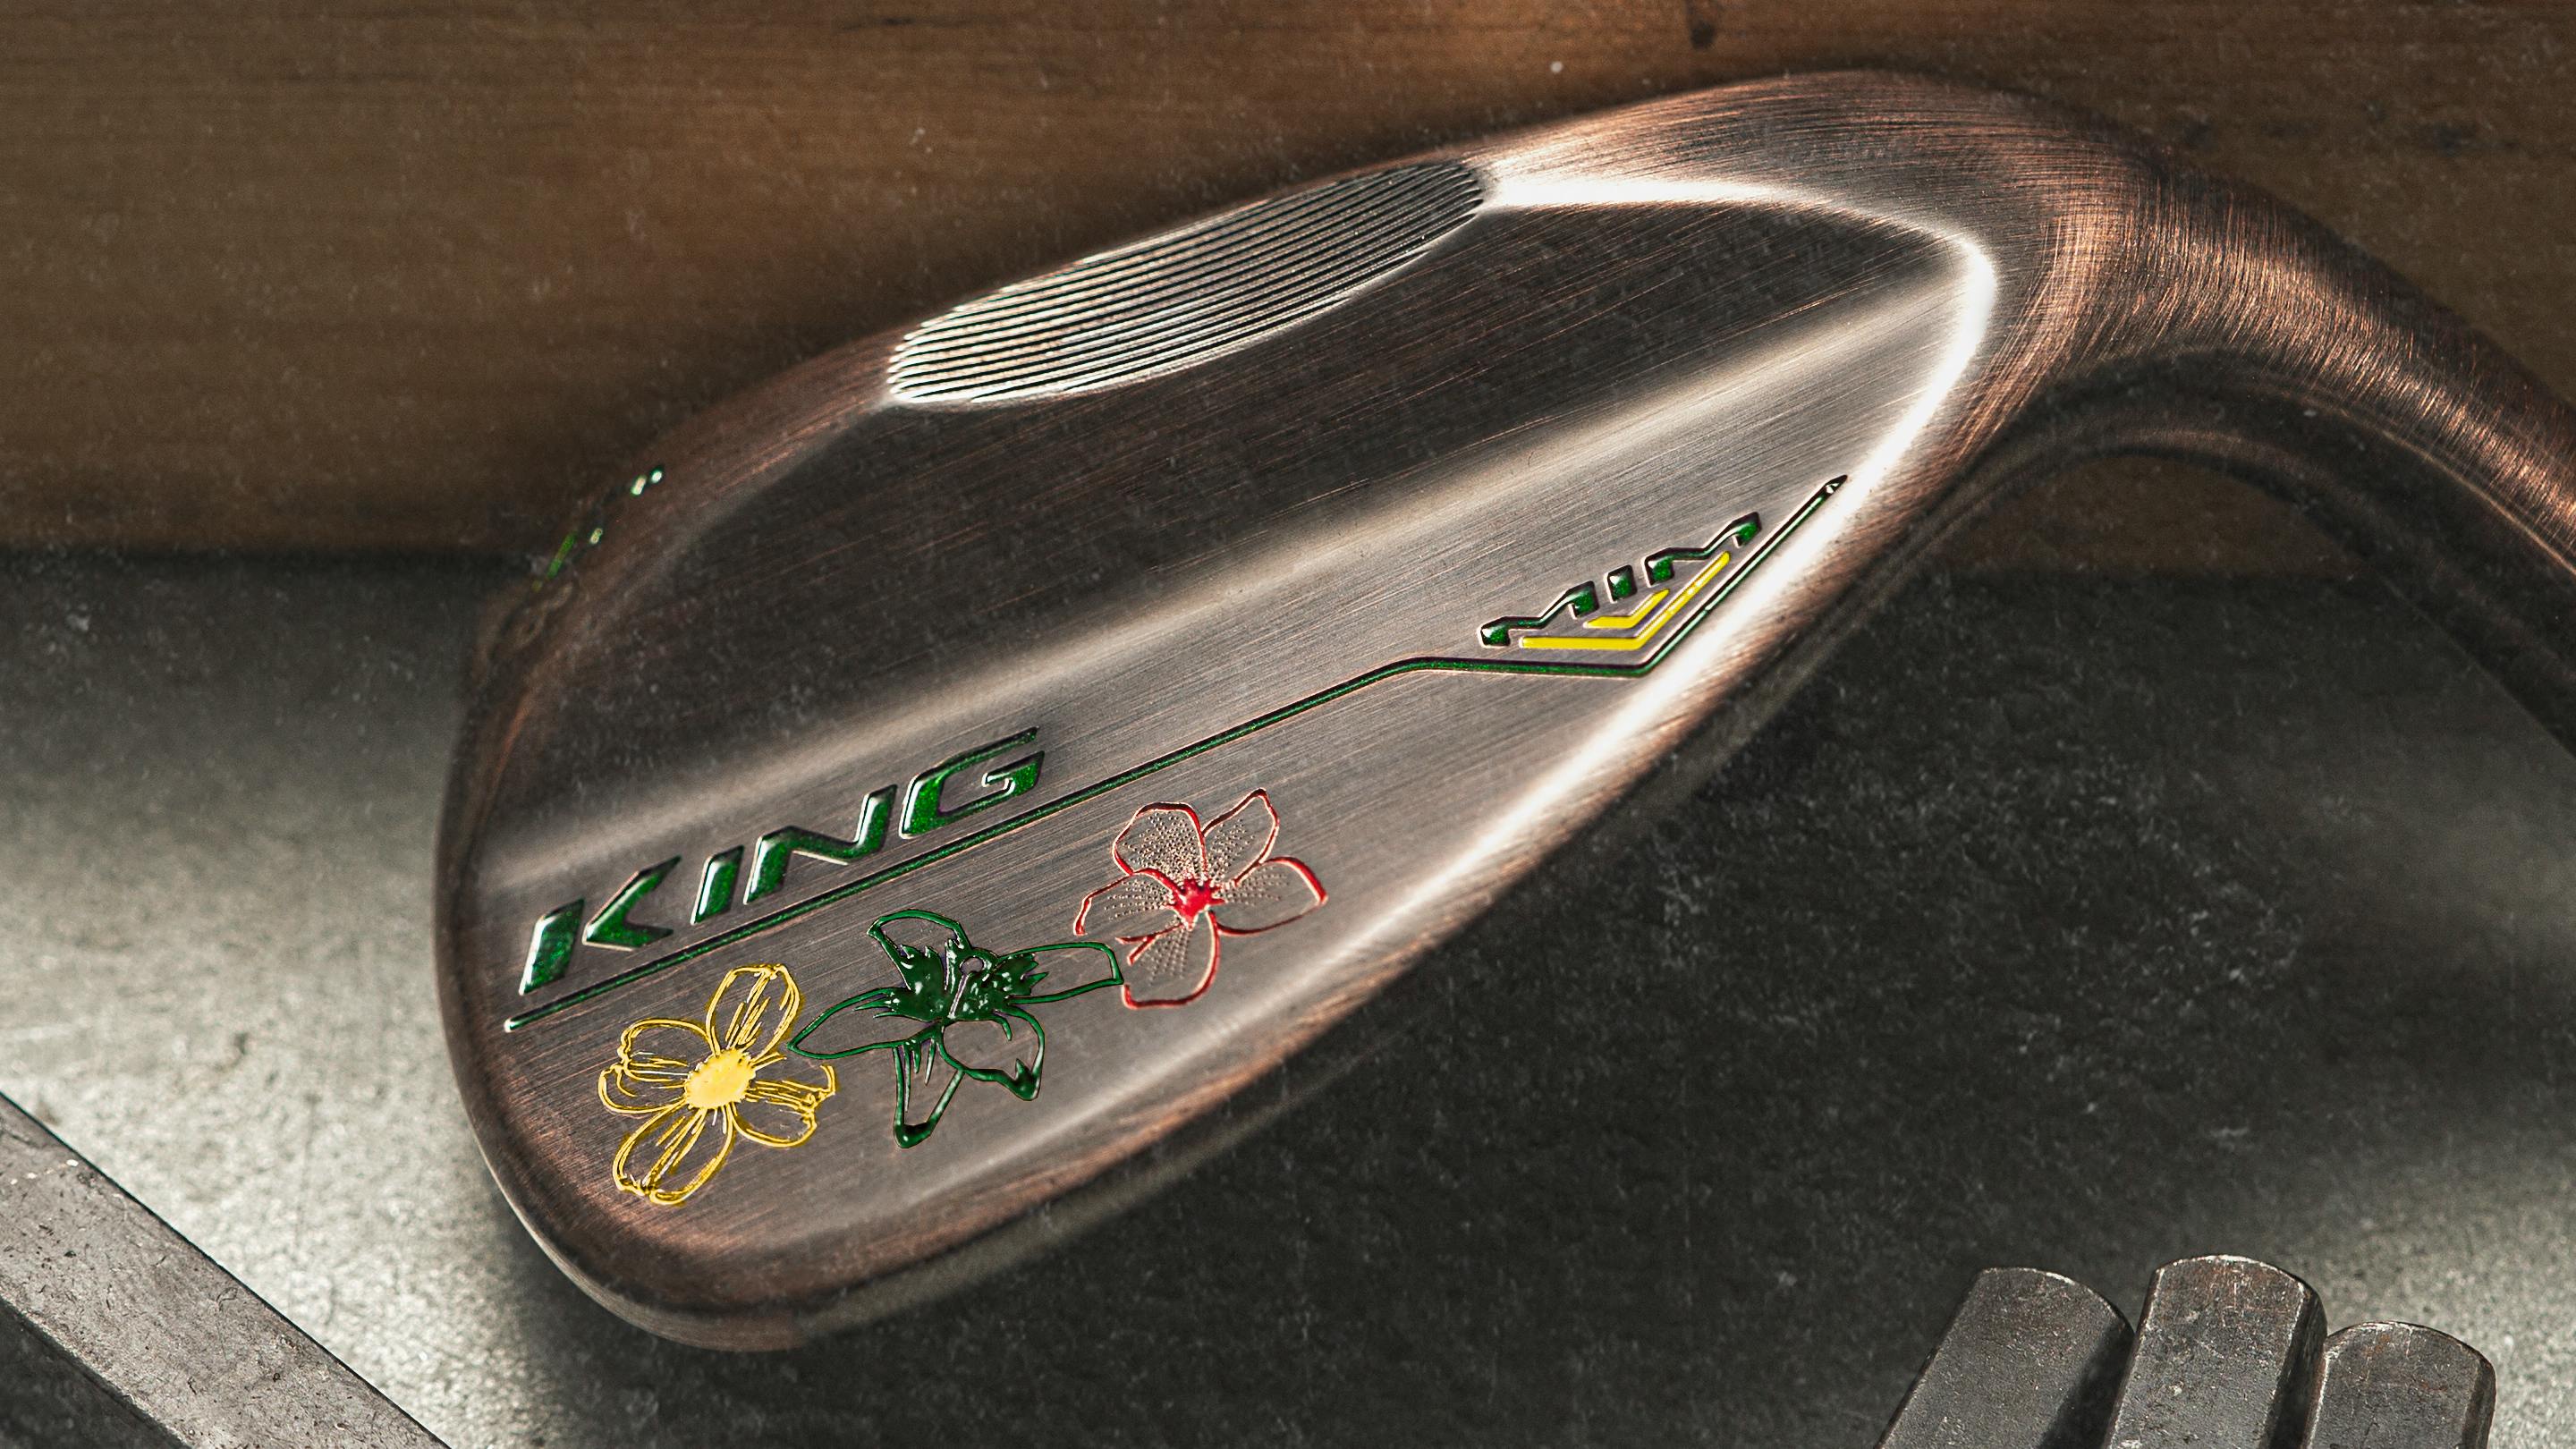 A King golf wedge with flower details